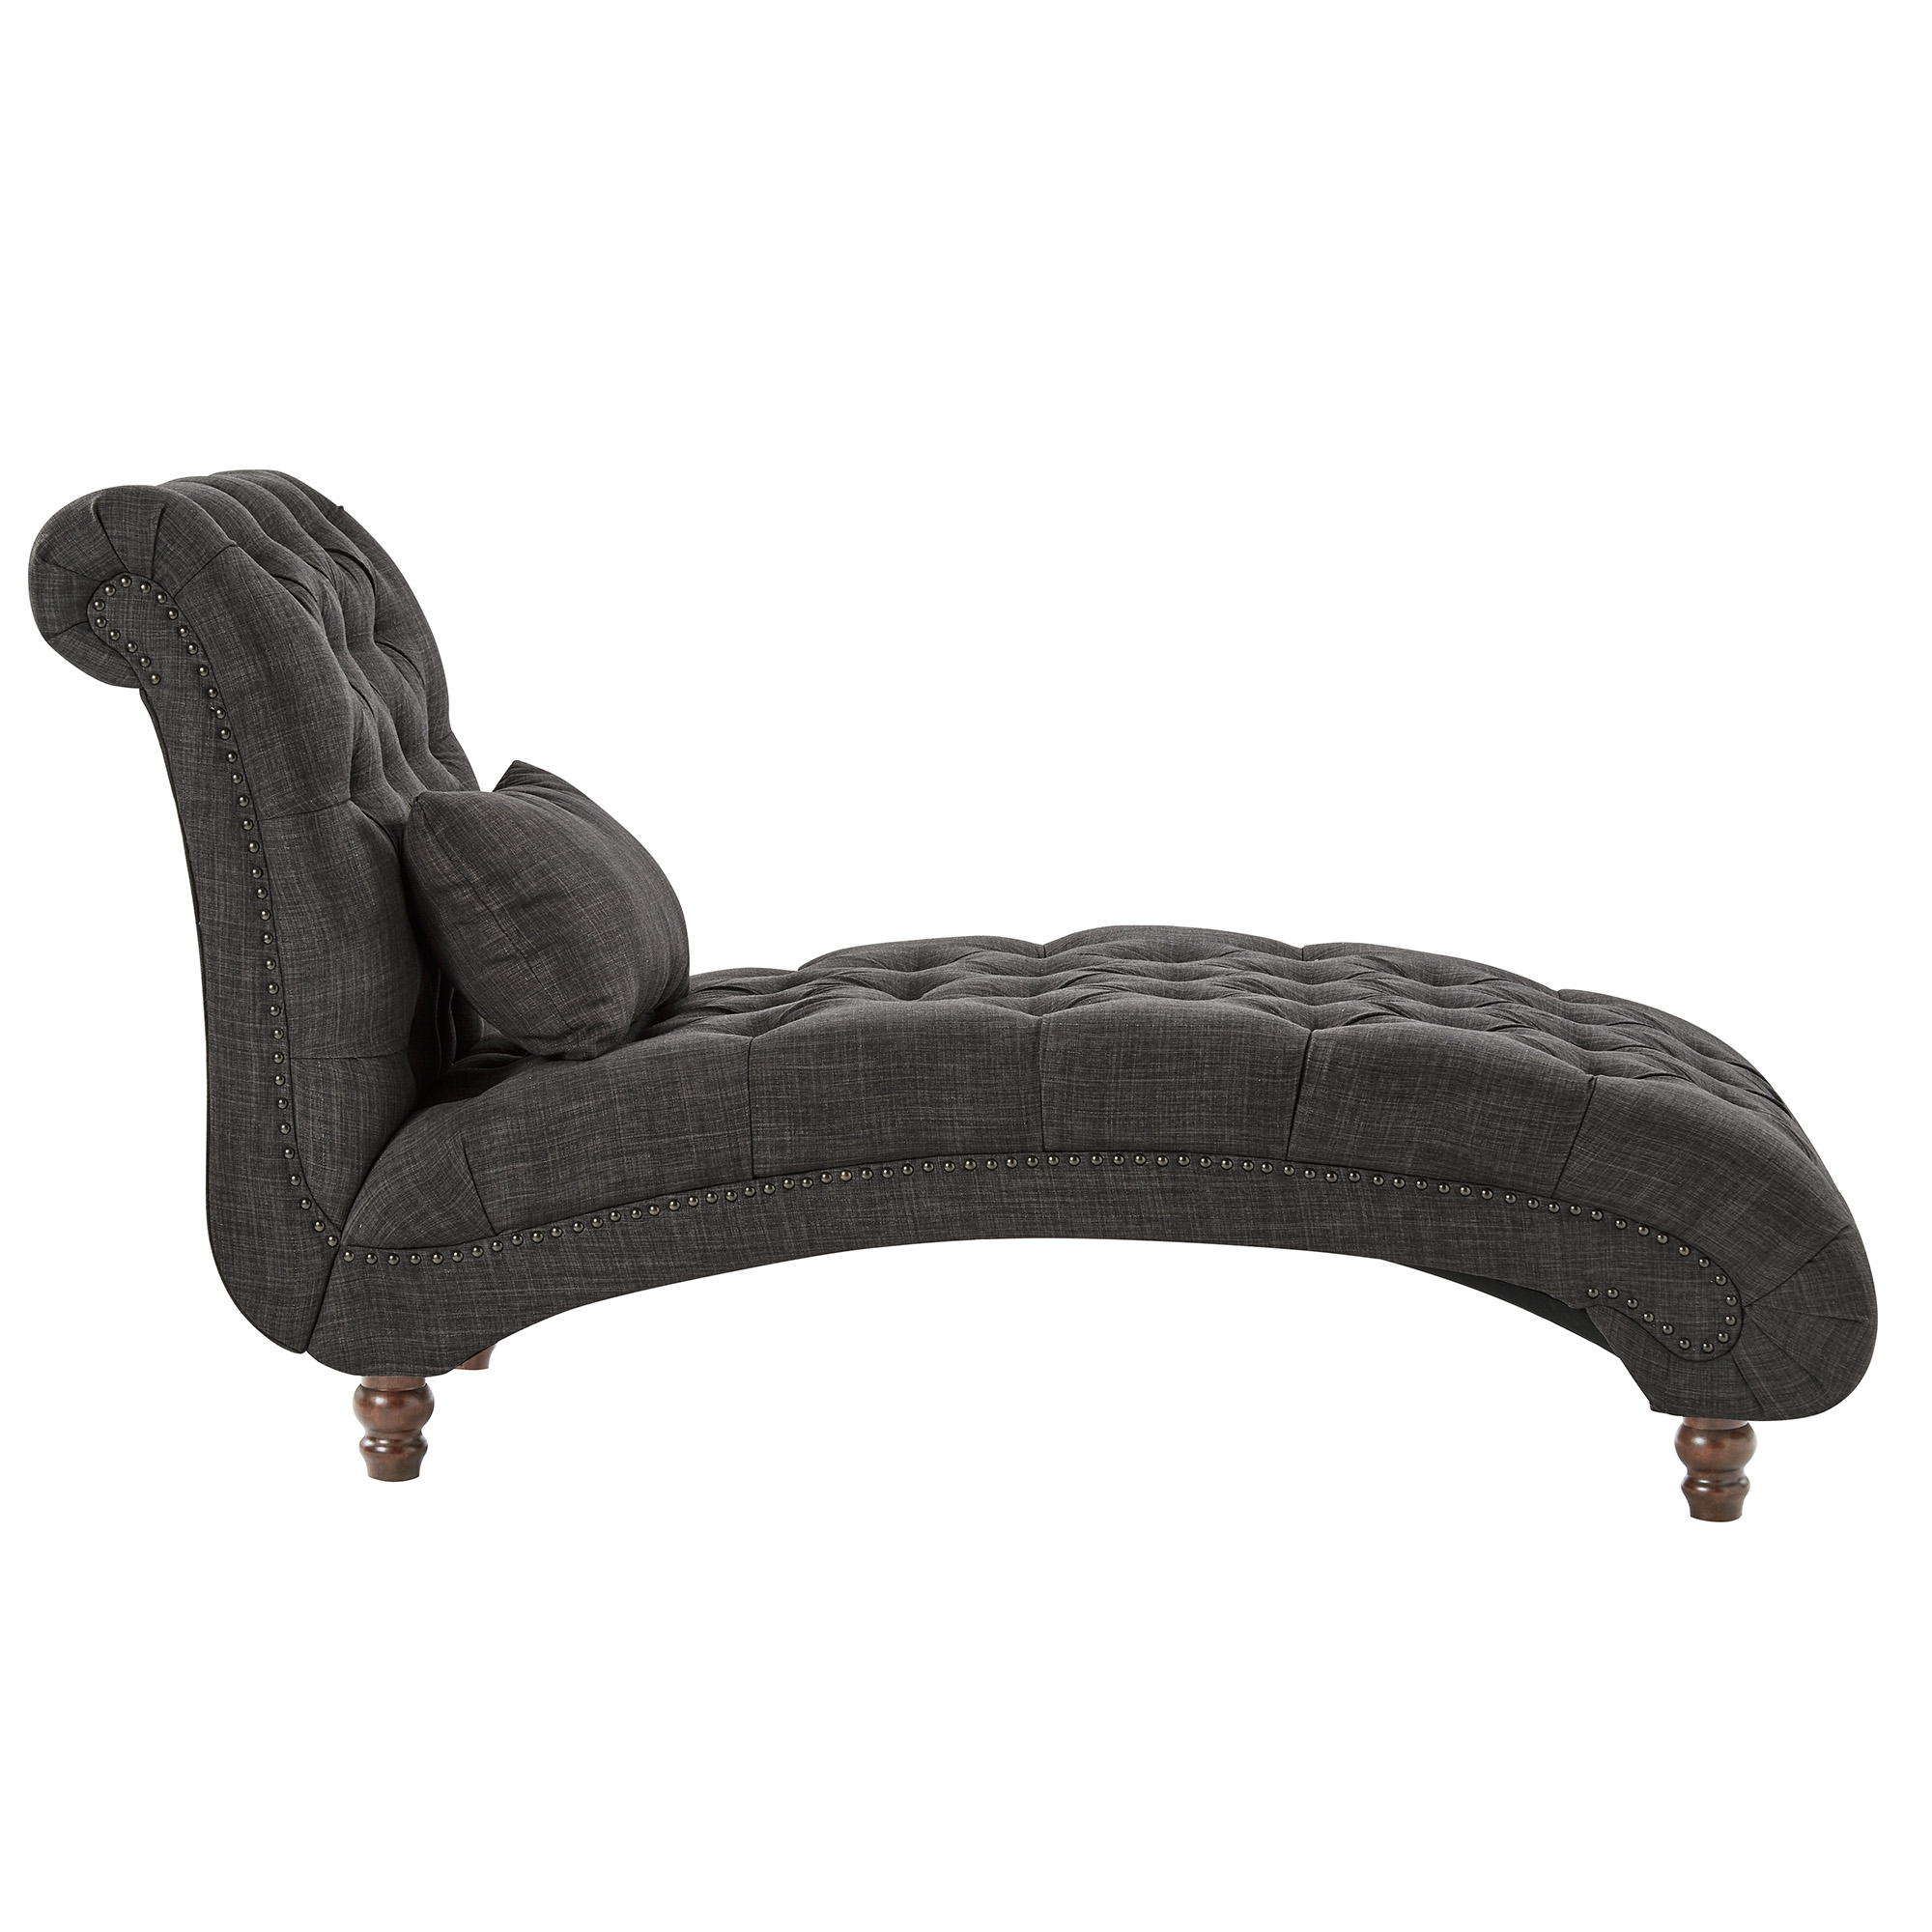 Weston Home Bowman Long Tufted Lounge Chair With Matching Pillow, Dark Gray Linen - image 3 of 6